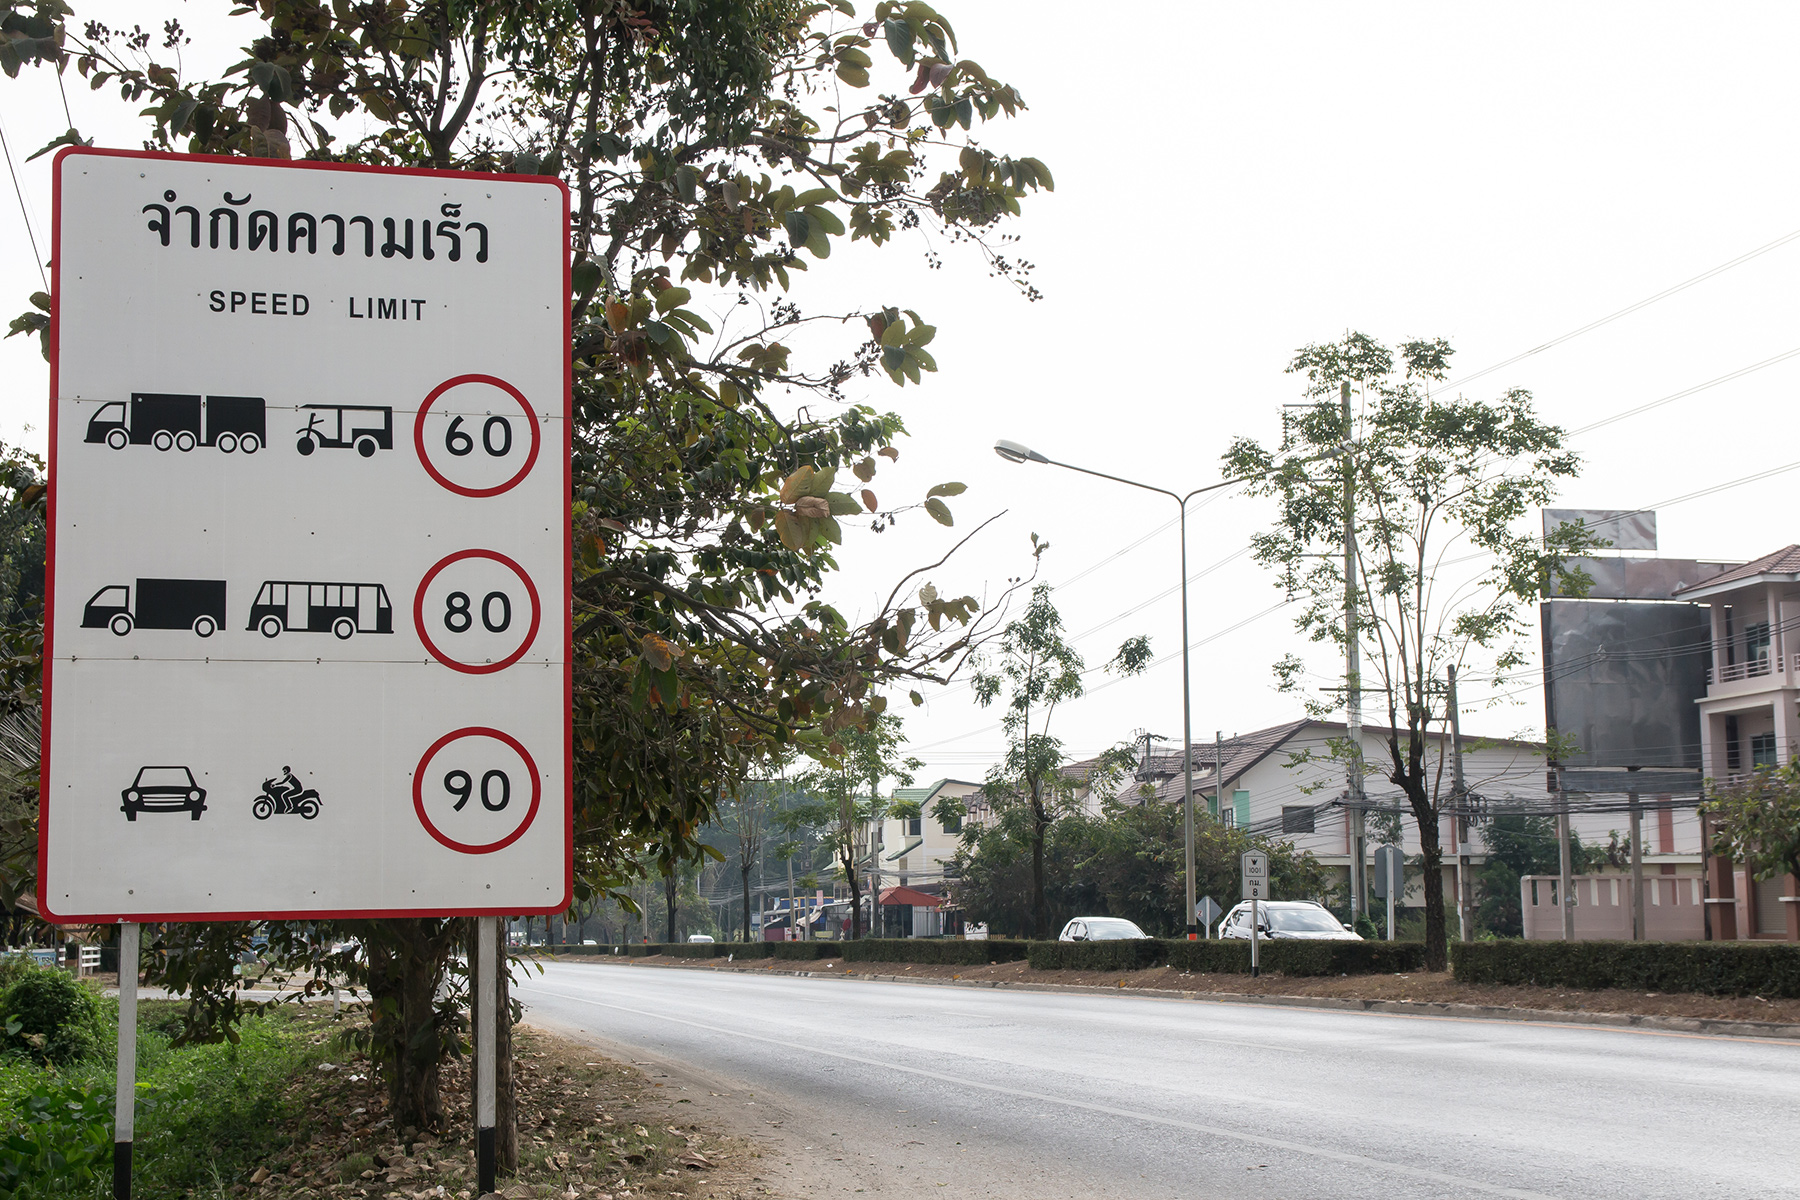 A sign displaying different speed limits for different vehicles.